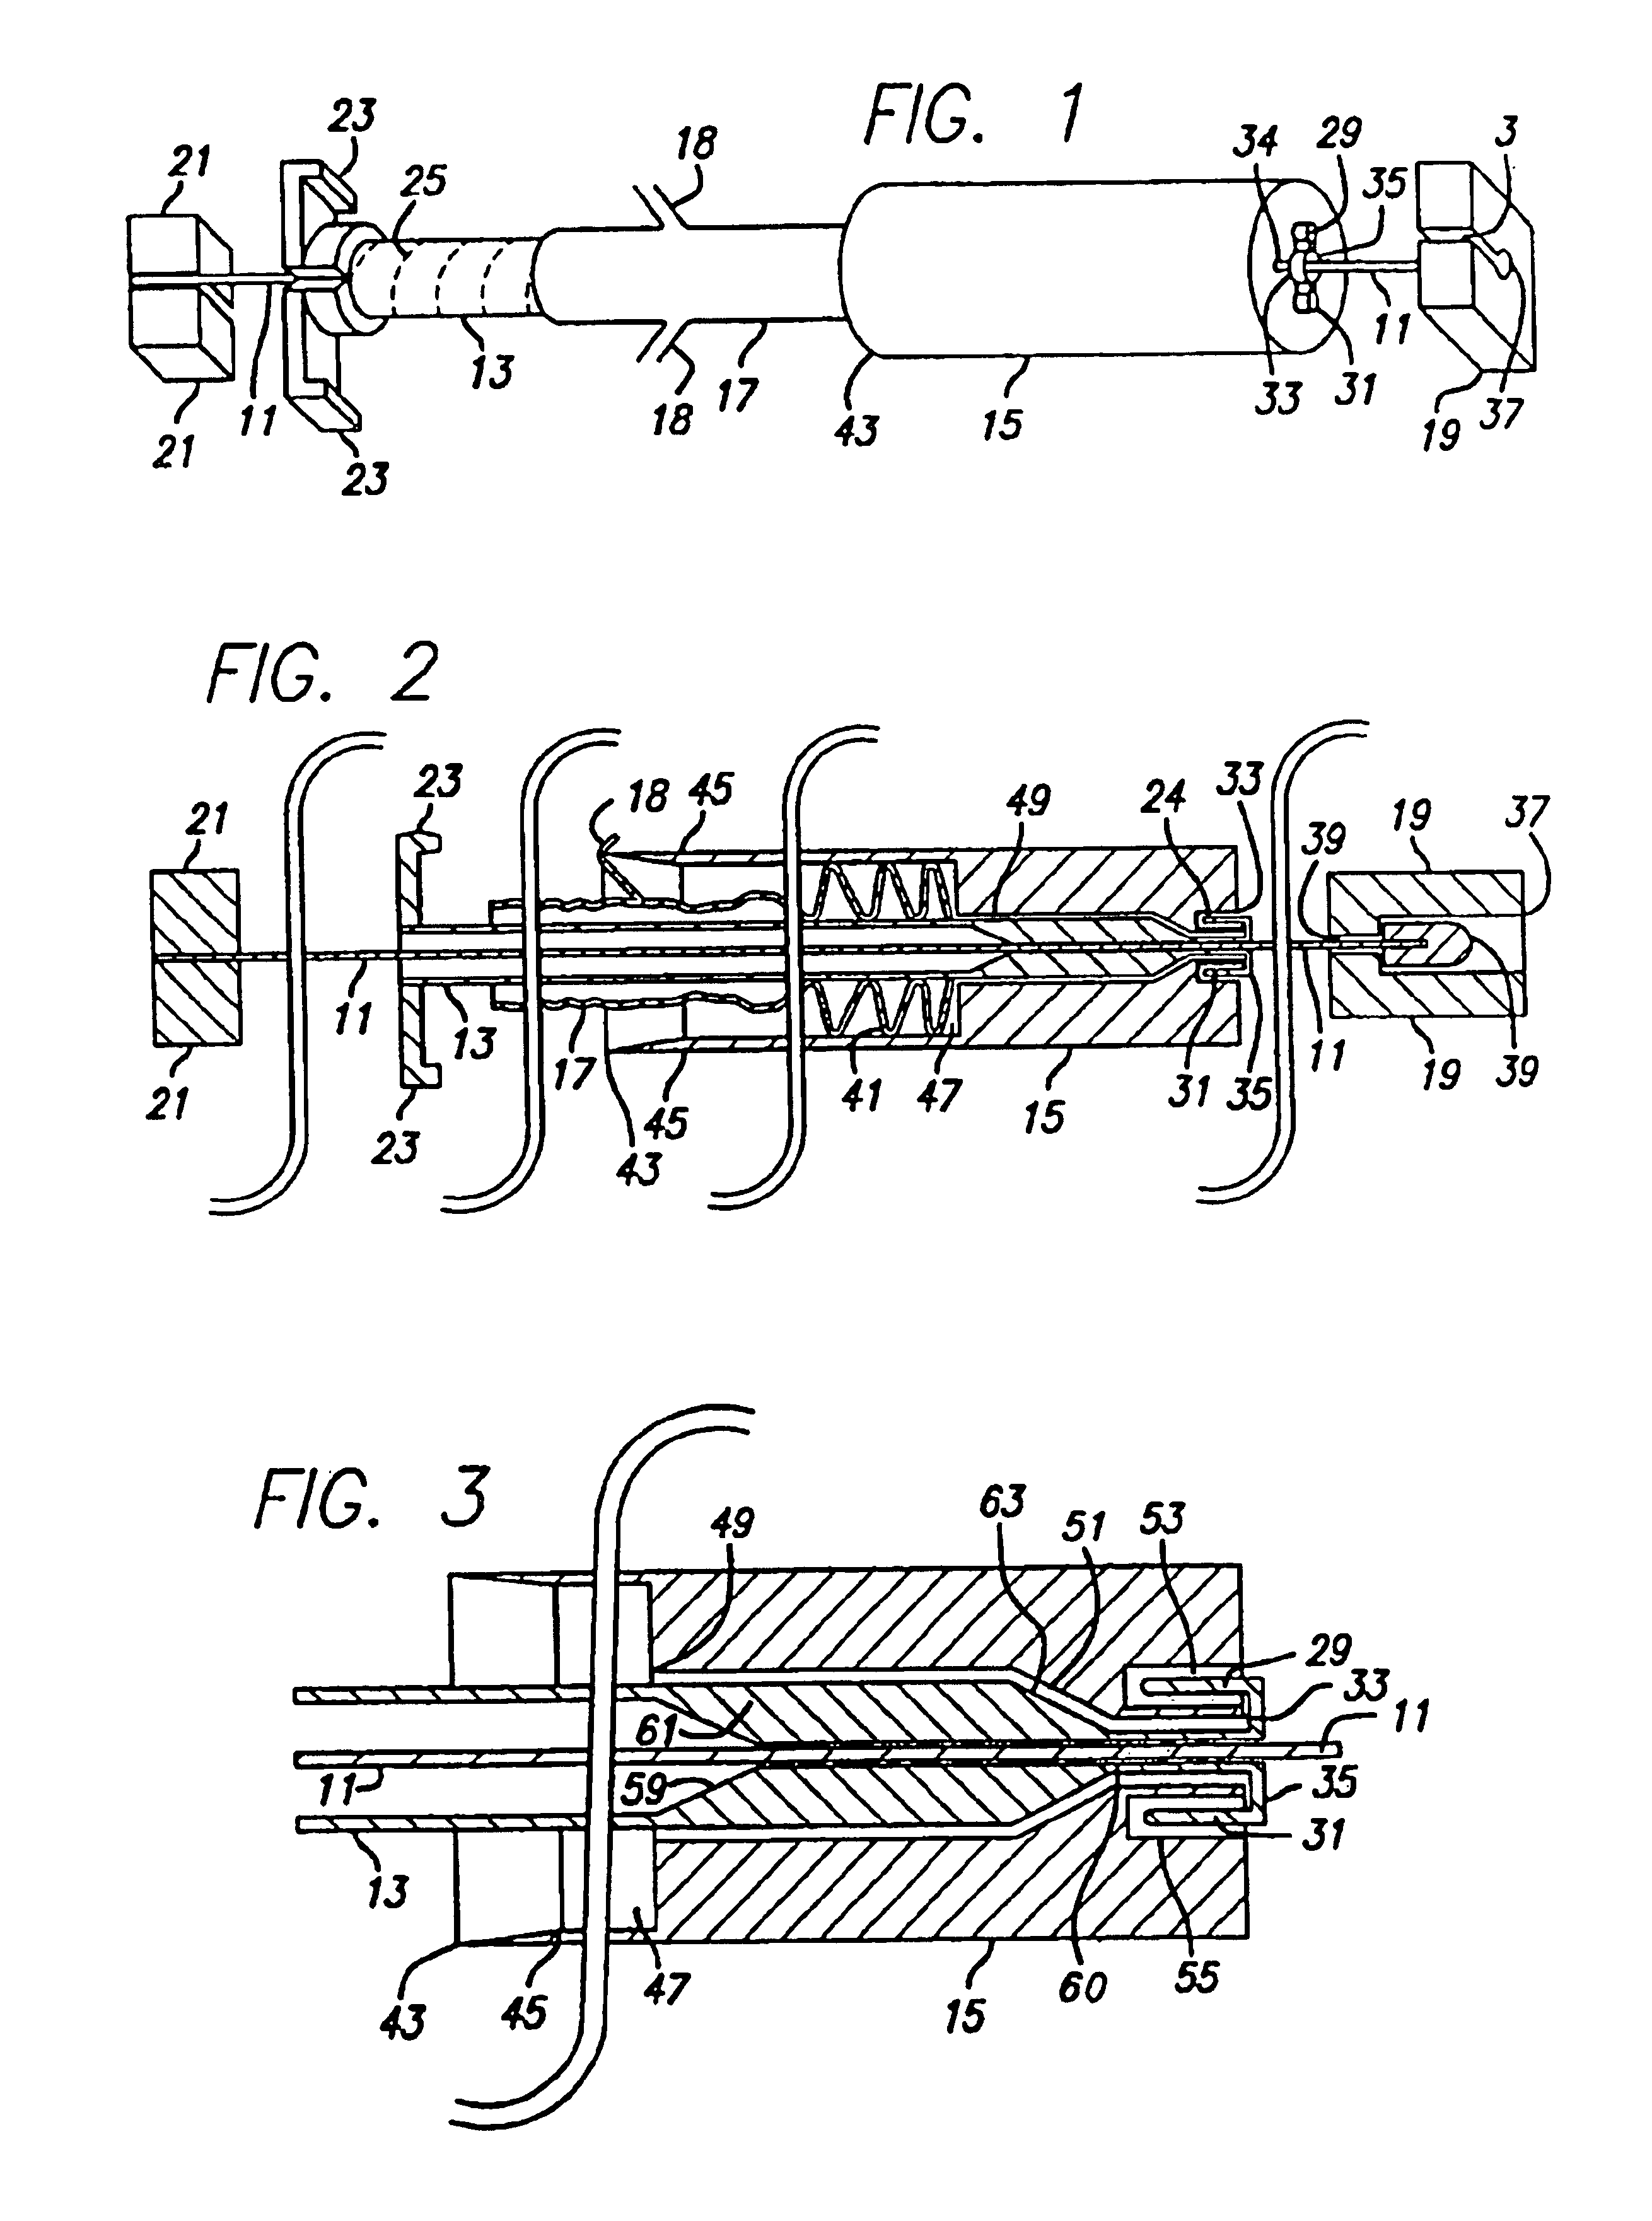 Method and apparatus for vessel harvesting